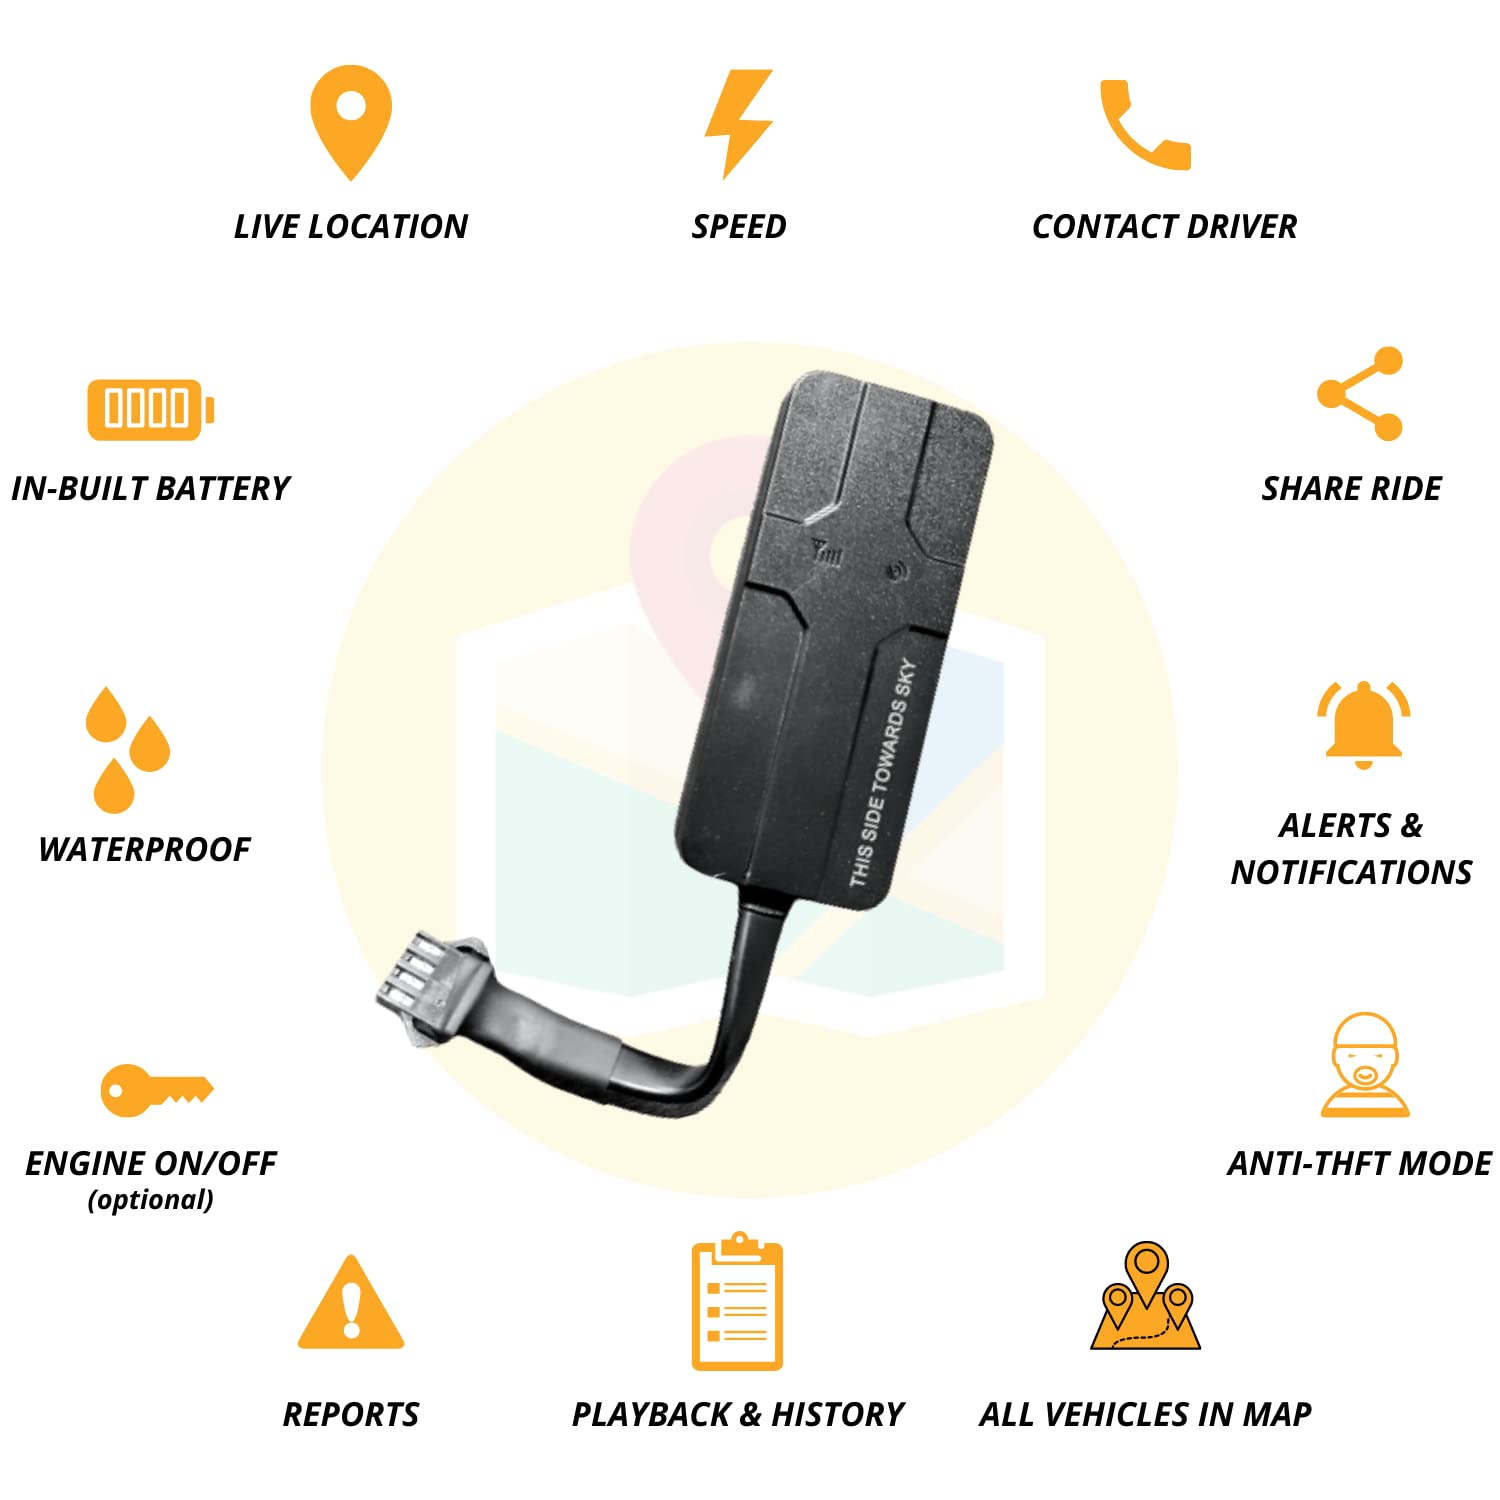 Best GPS tracker for cars in India, Best GPS tracker for bikes in India,GPS trackers,gps tracker for car,gps tracker for bike,gps,cheap gps tracker,car gps,bike gps,best gps trackers